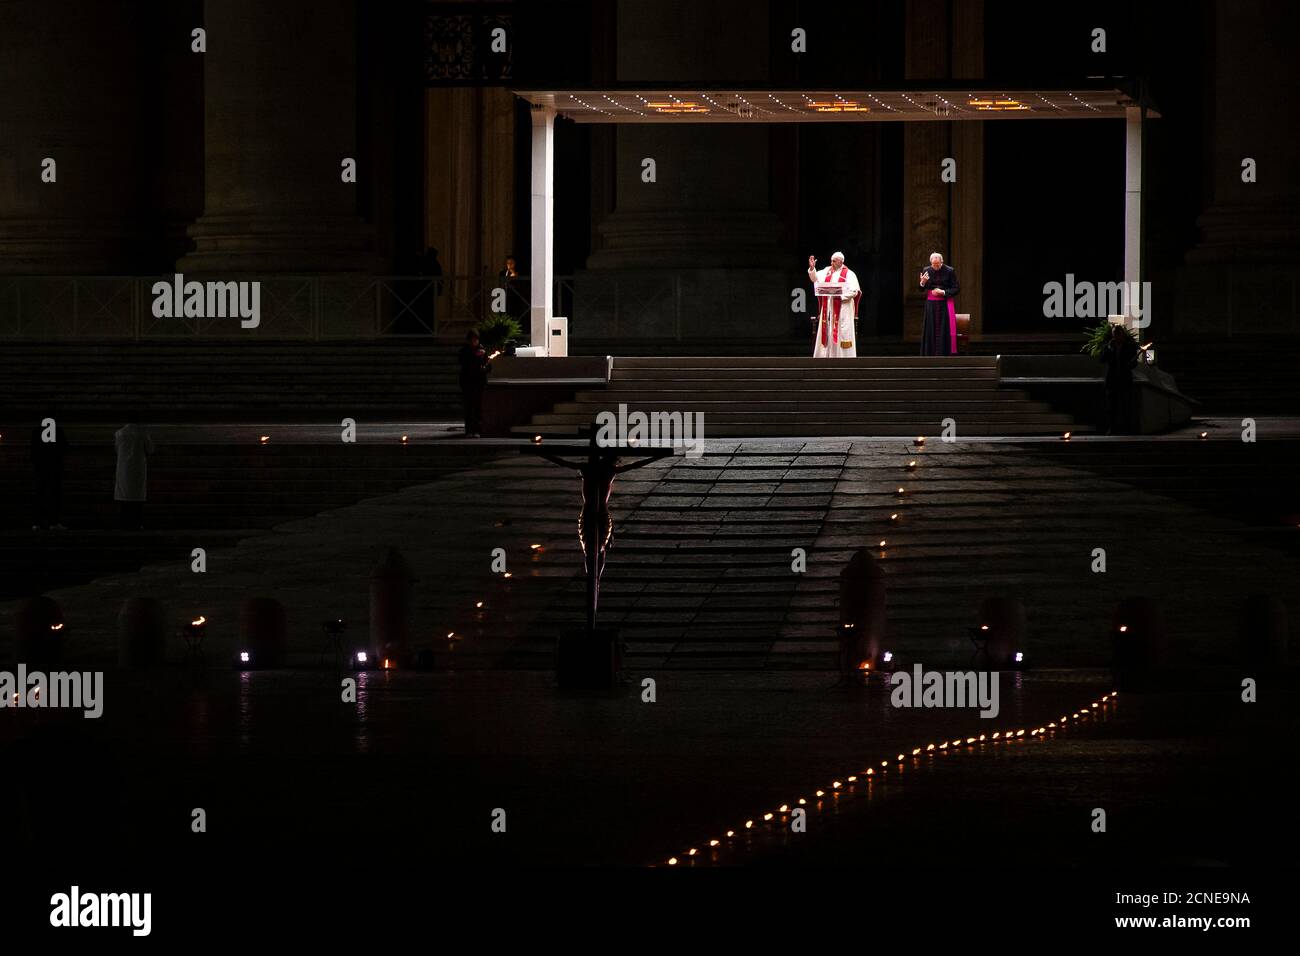 Pope Francis presides over Good Friday's Way of the Cross (Via Crucis) at St. Peter's Square, Vatican, Rome, Lazio, Italy, Europe Stock Photo